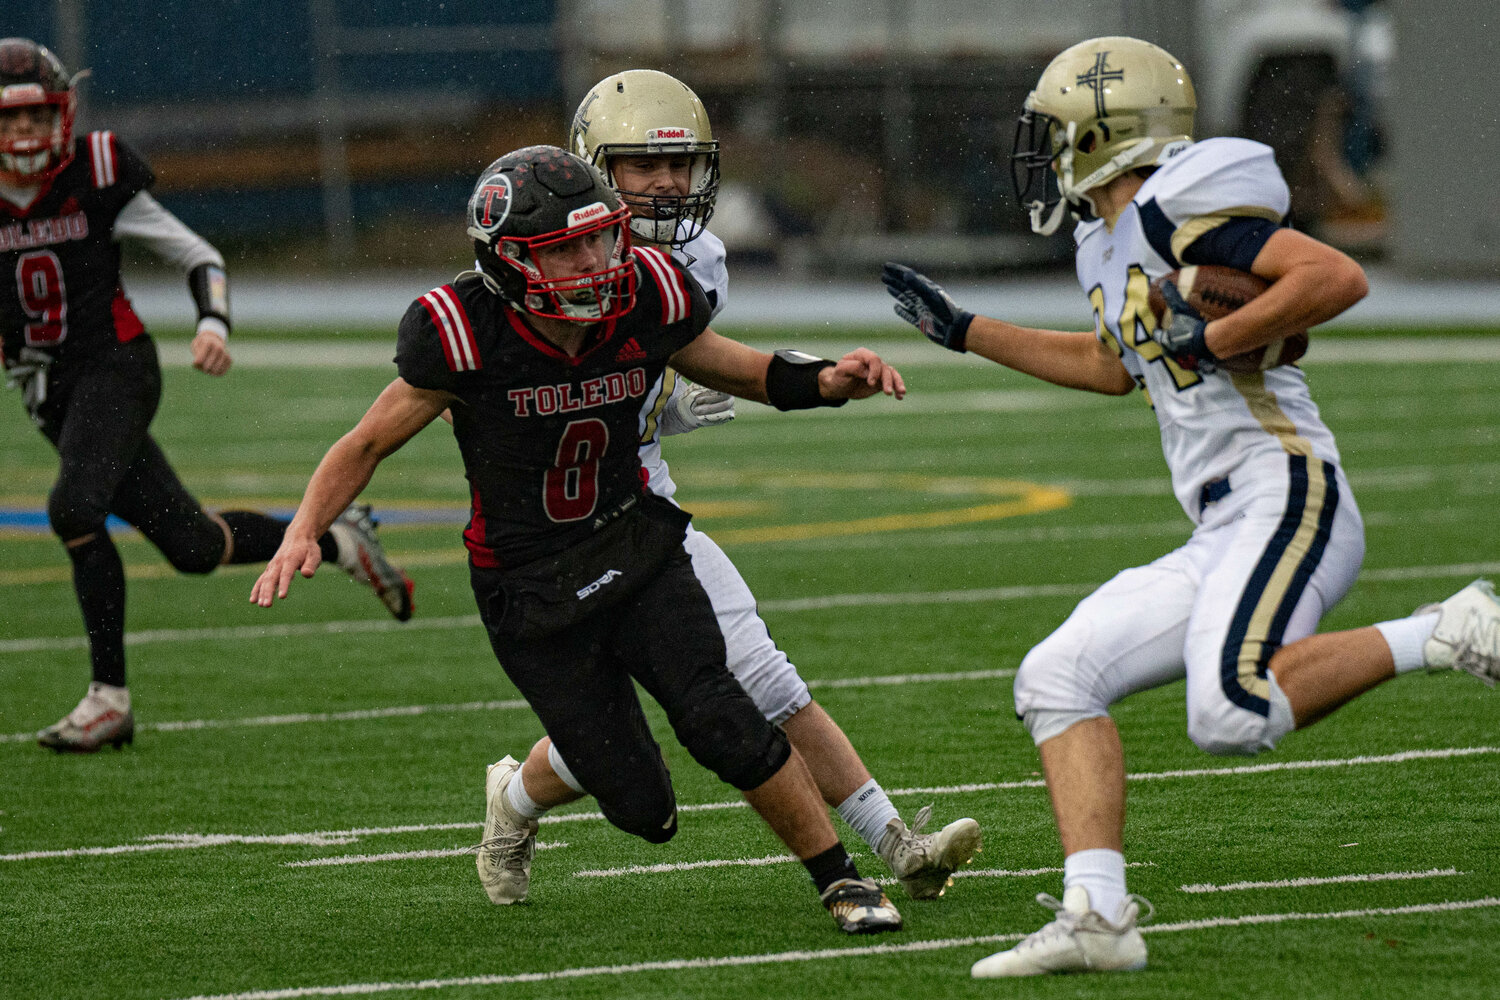 Toledo's Ethen Carver attempts a tackle during a 21-12 victory over Tri Cities Prep Nov. 11